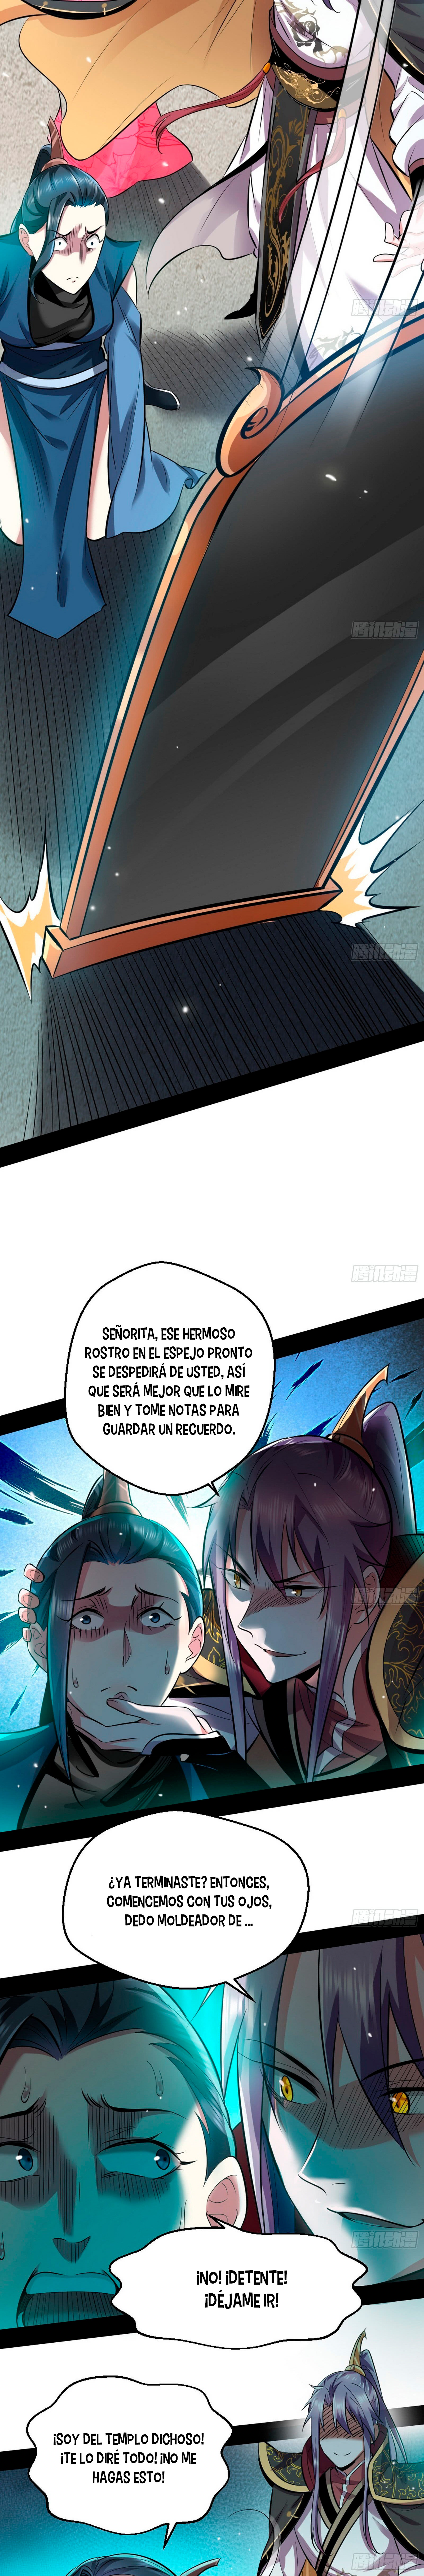 Manga Soy un dios maligno Chapter 45 image number 9